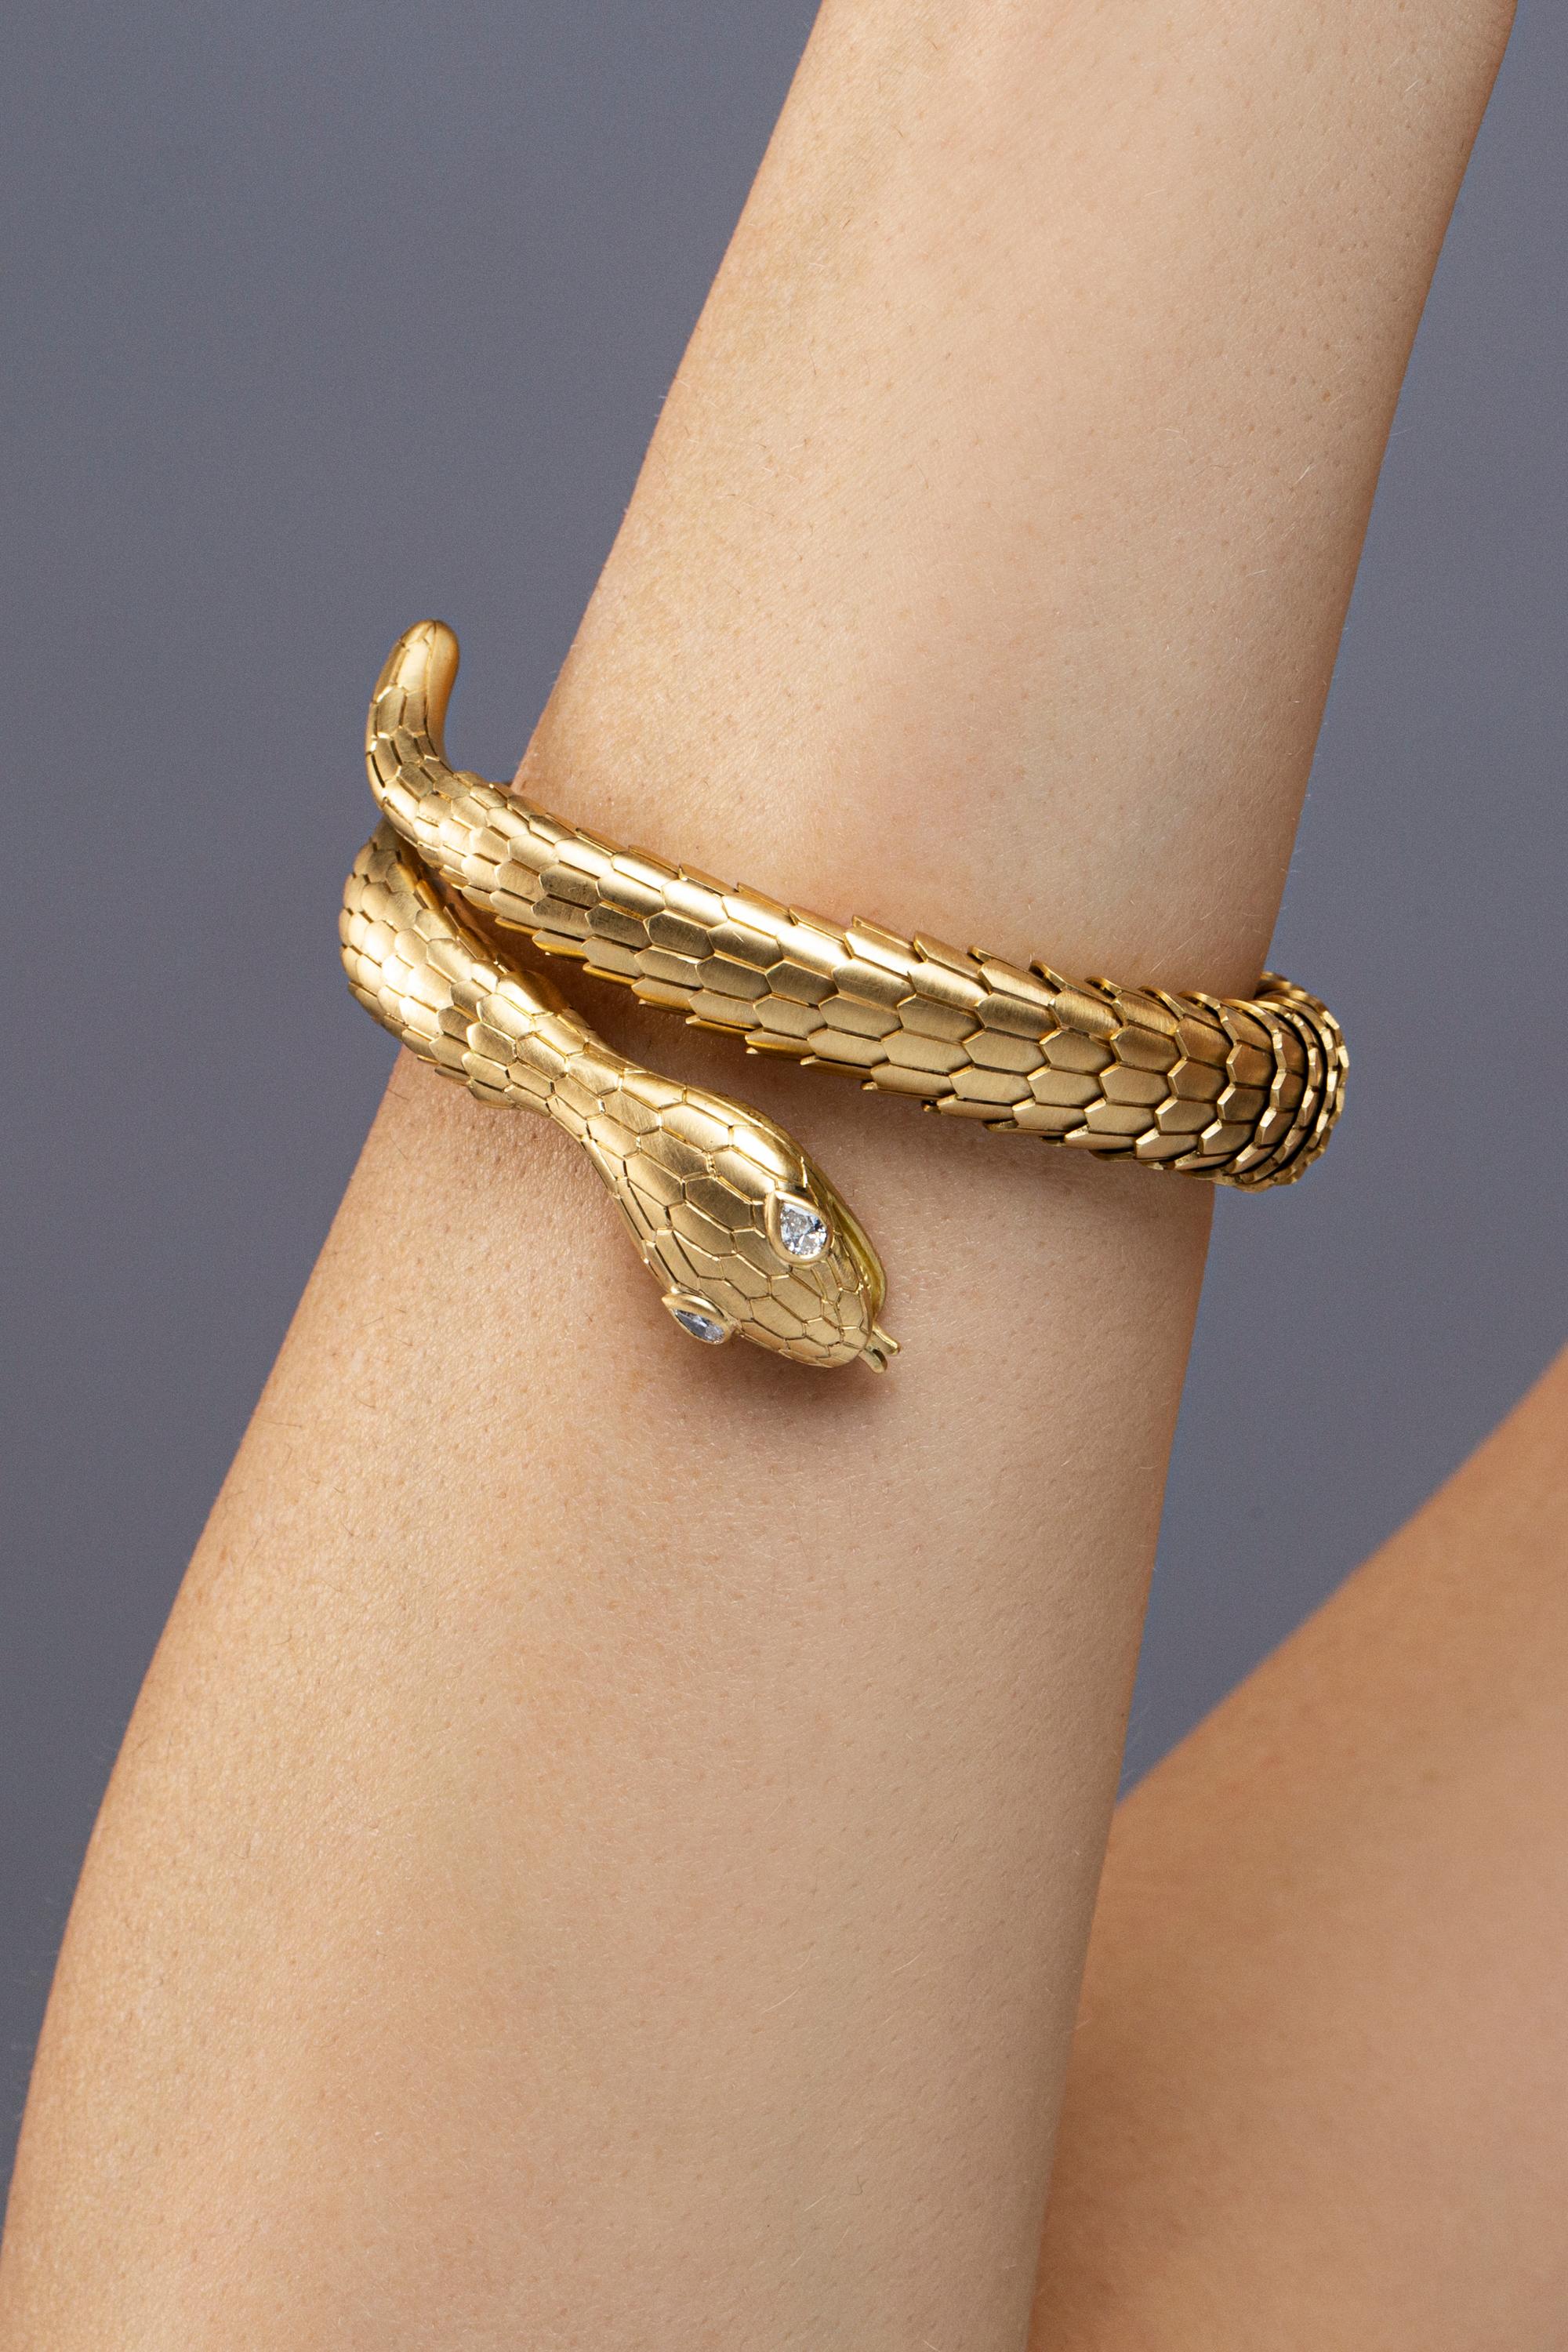 Jona design collection, hand crafted in Italy, 18 karat brushed yellow gold flexible coil snake bracelet. Two drop cut diamonds weighting 0.19 carats set on the head of the serpent. The body made of flexible scaled brushed gold links.
Dimensions: H